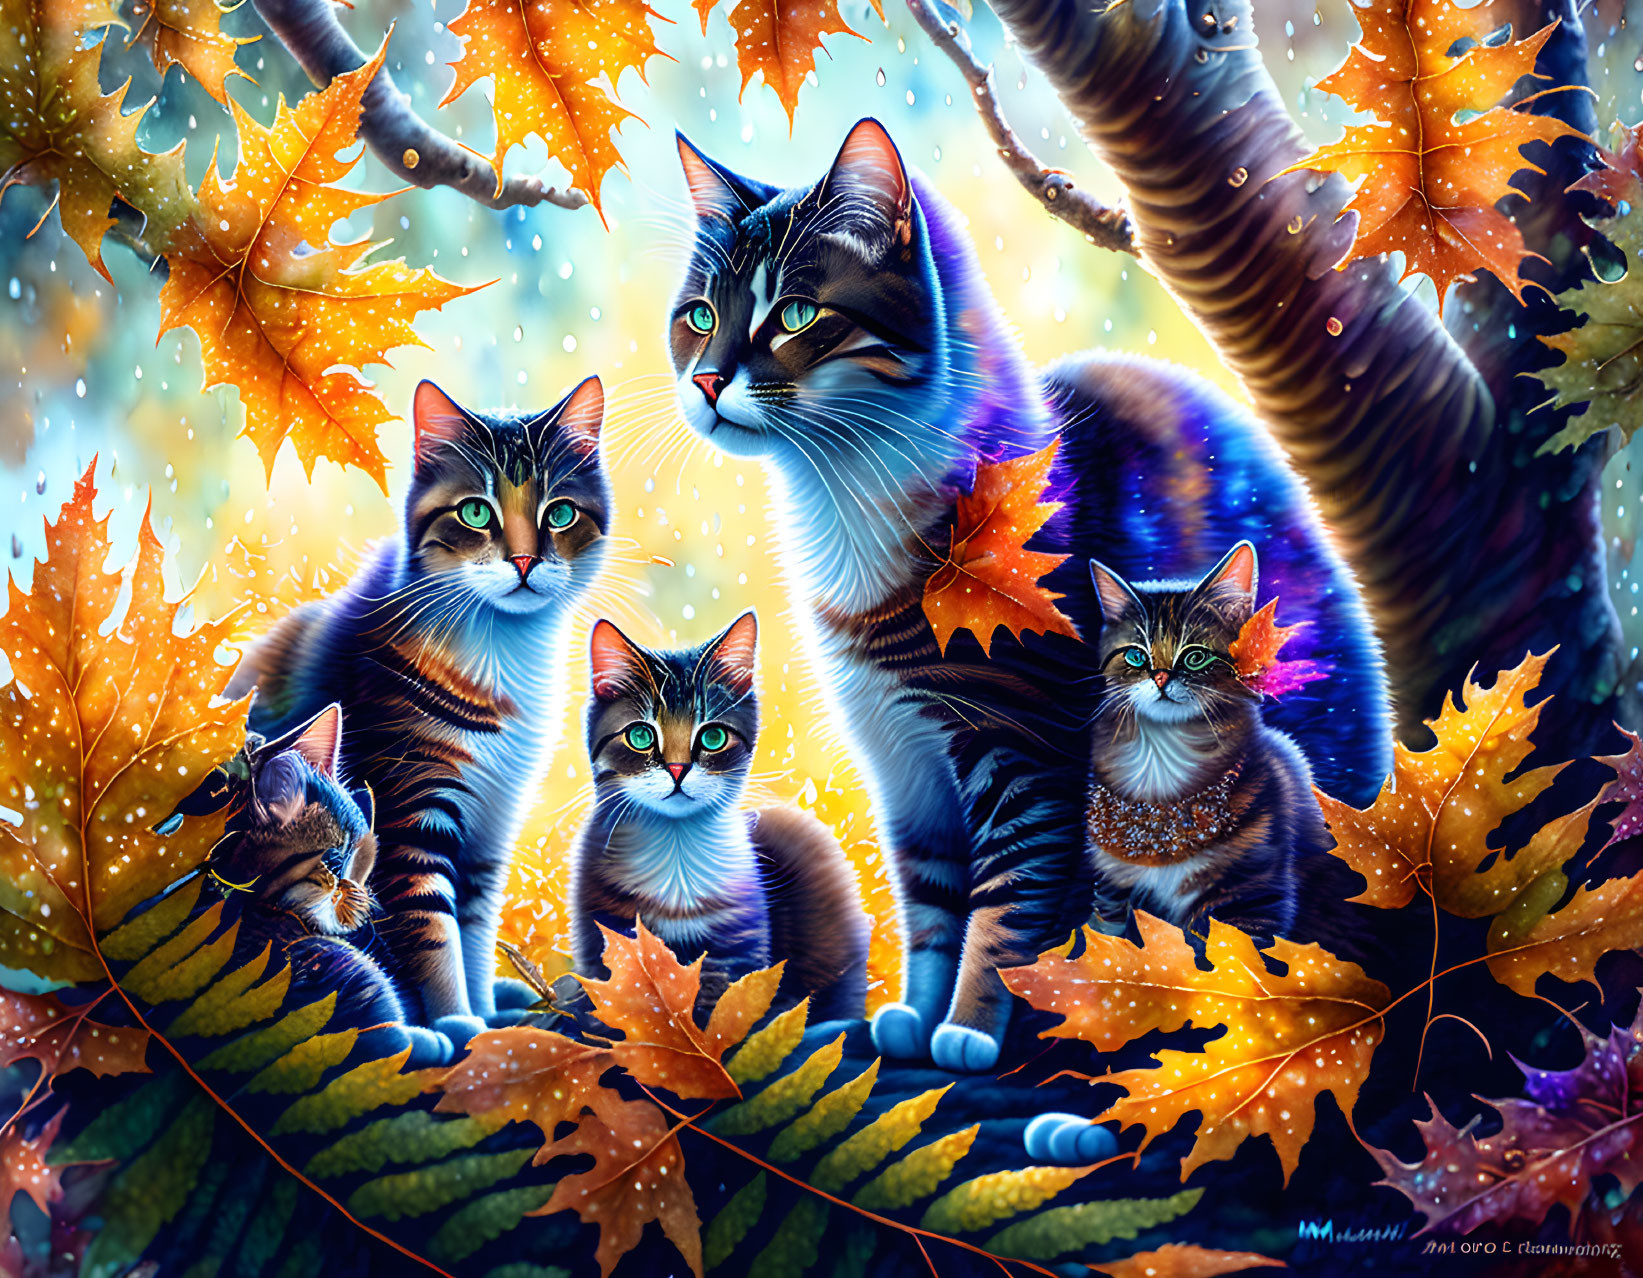 Digital Art: Five Cats with Mesmerizing Eyes in Autumn Scene